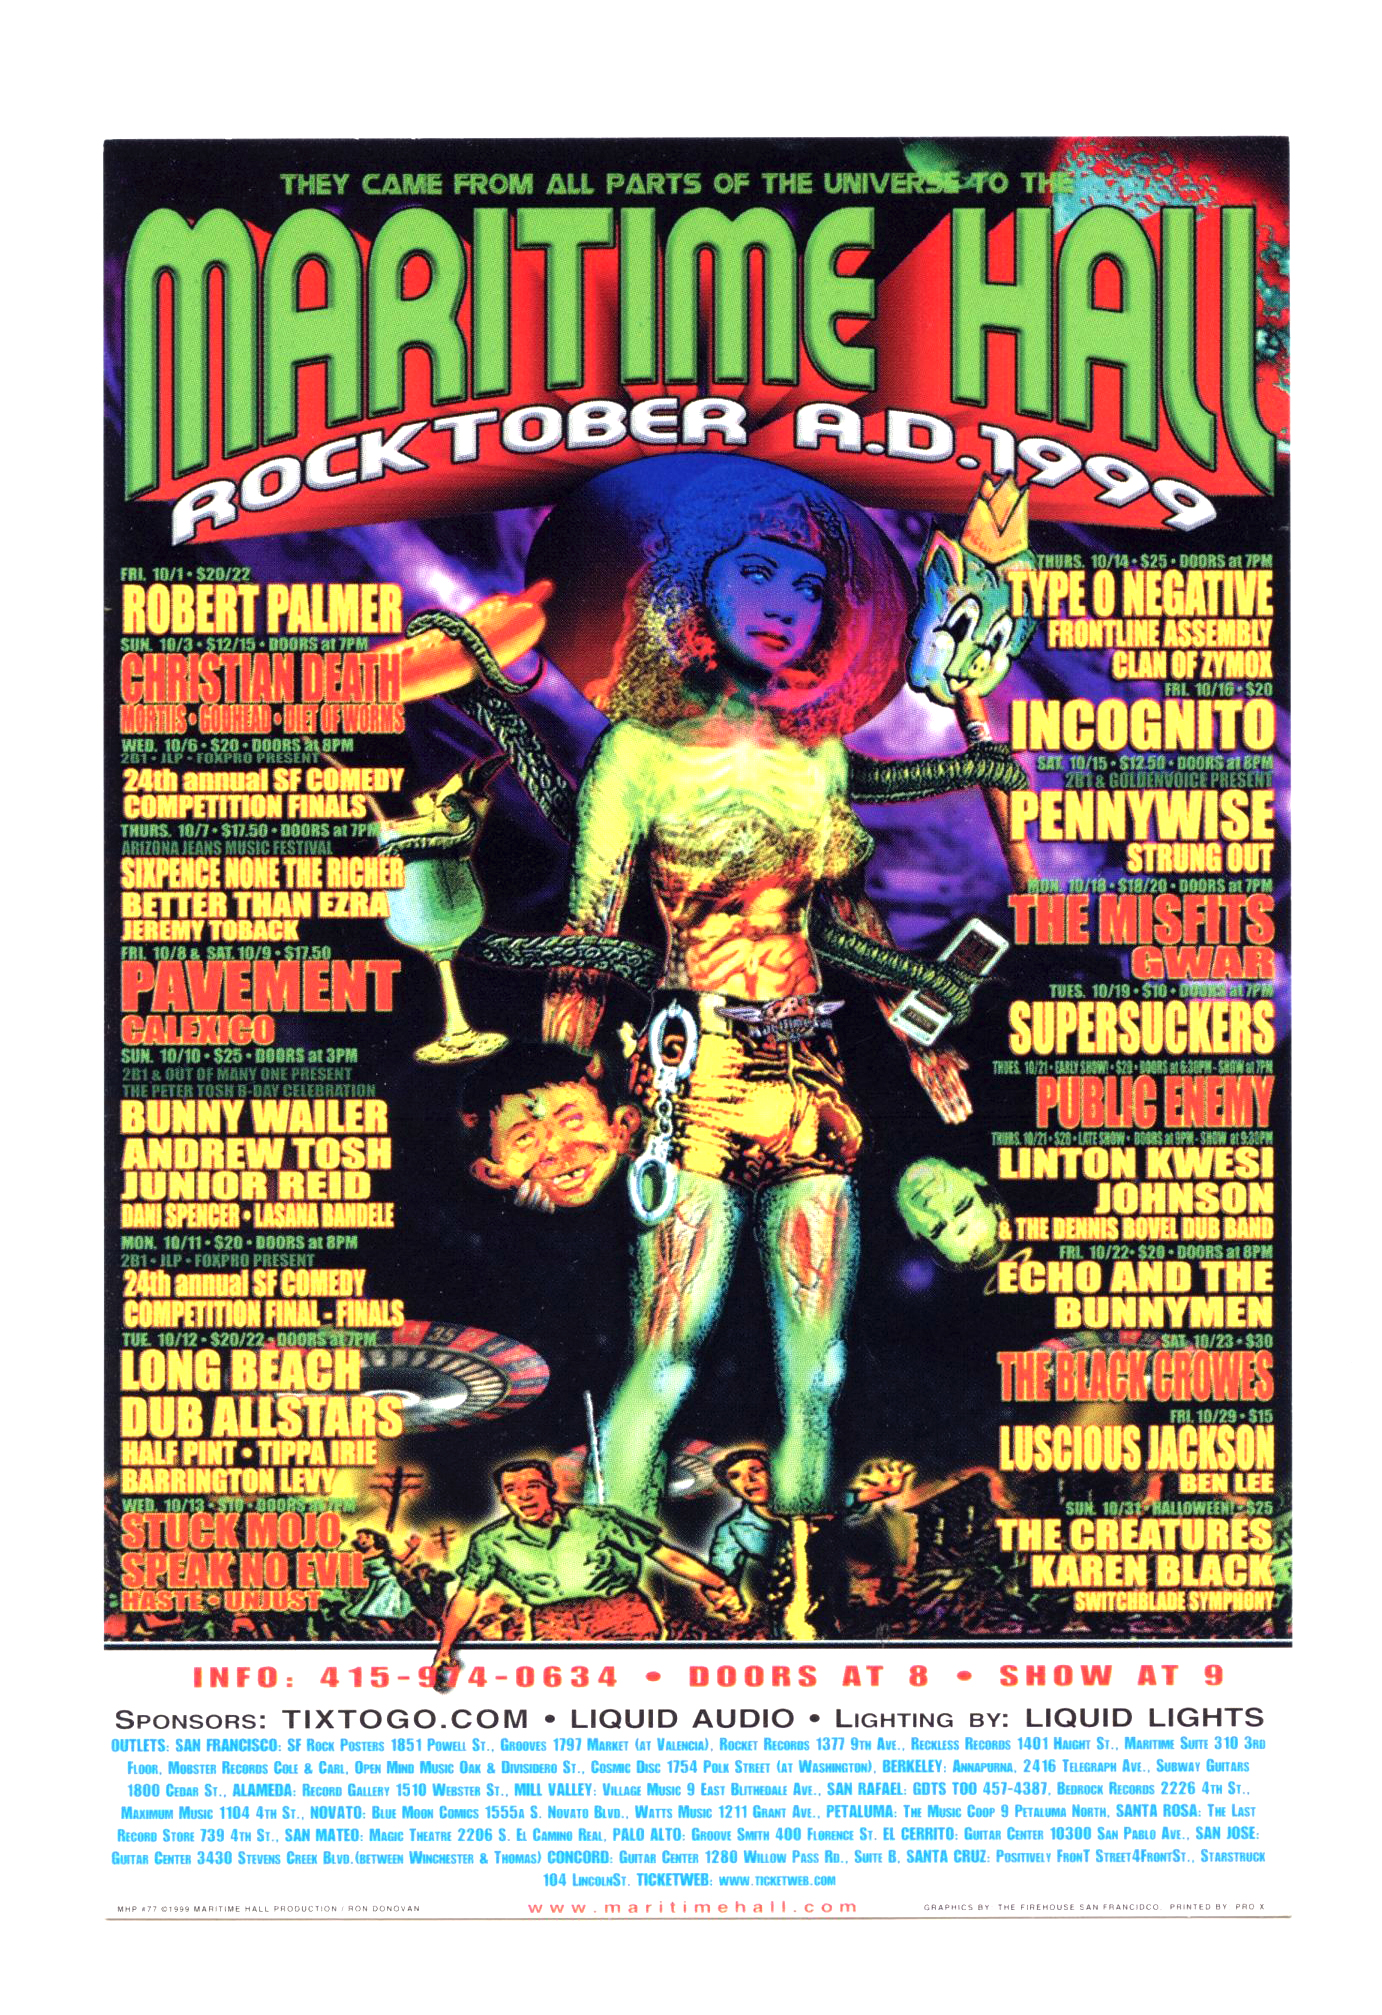 Maritime Hall 1999 Oct Handbill Robert Palmer The Black Crowes Crowes Type O Negative